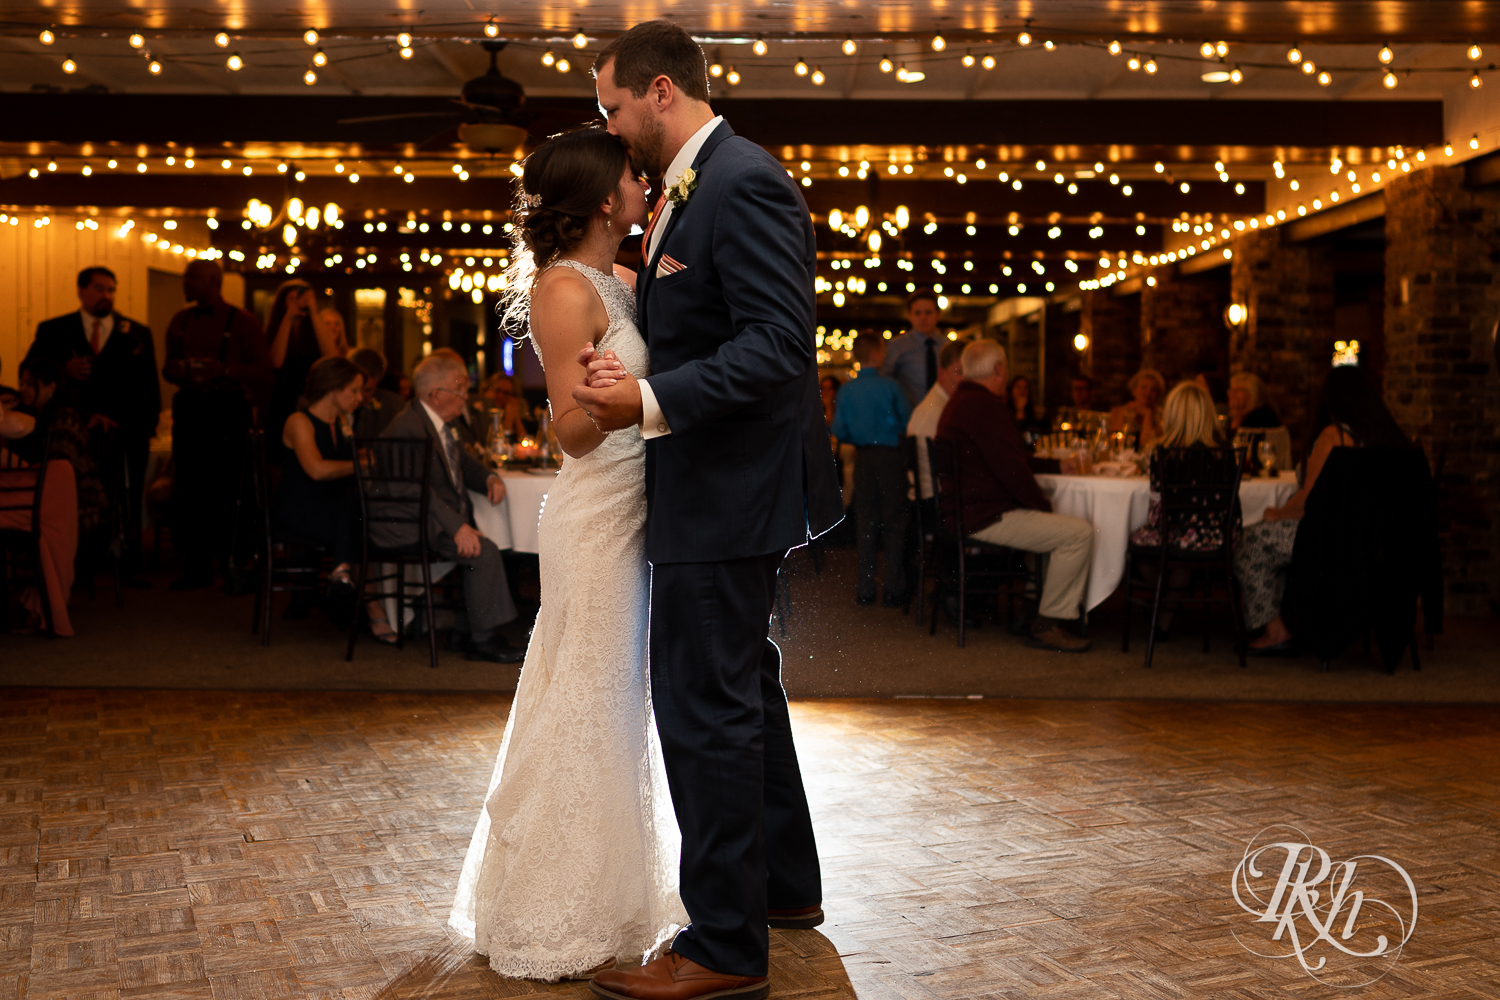 Bride and groom share first dance during wedding reception at The Chart House in Lakeville, Minnesota.